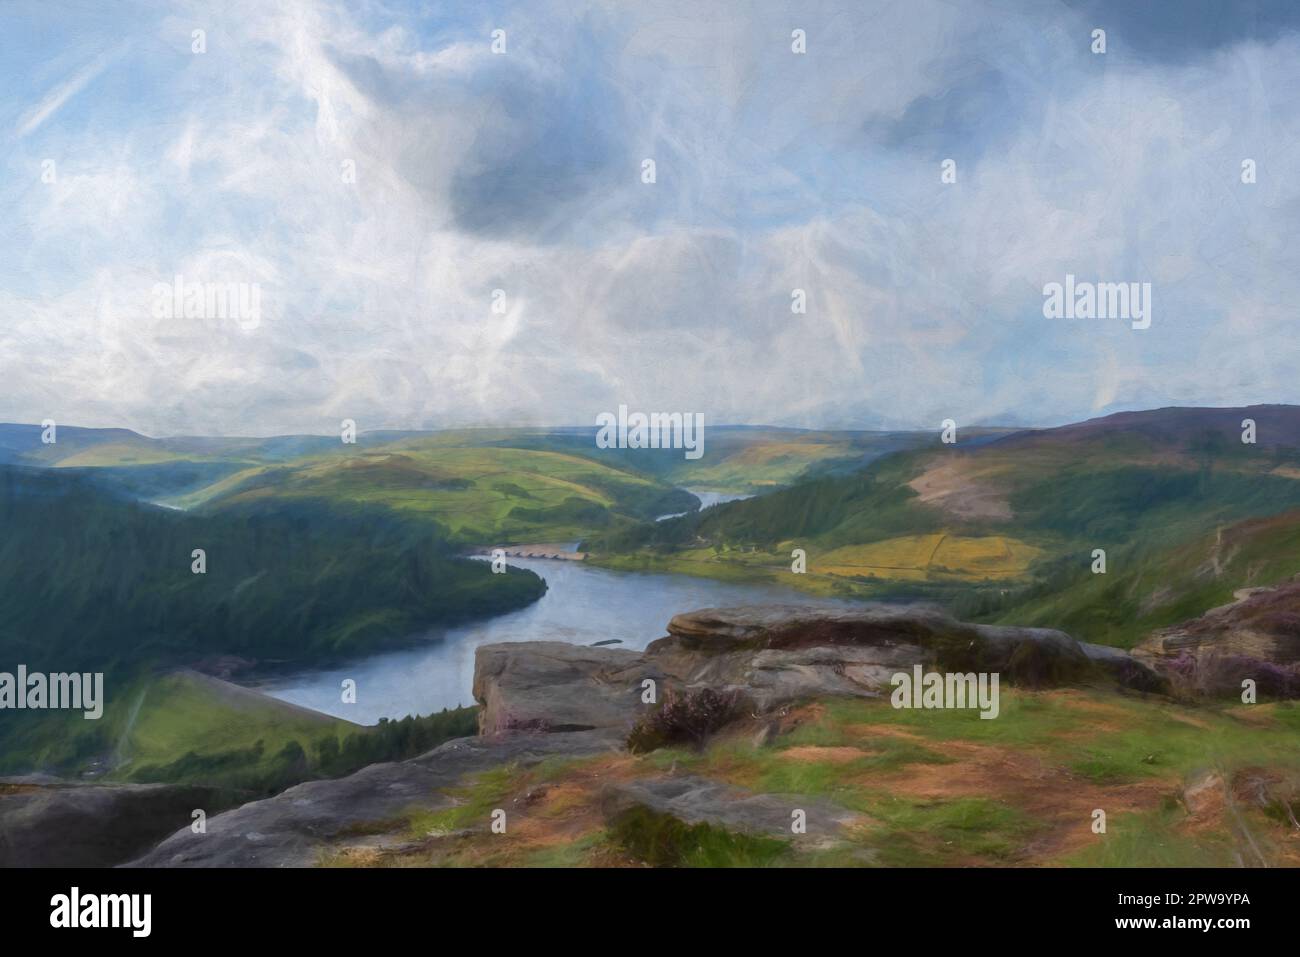 Digital painting of the Ashopton Viaduct, Ladybower Reservoir, and Crook Hill in the Derbyshire Peak District National Park, England, UK. Stock Photo